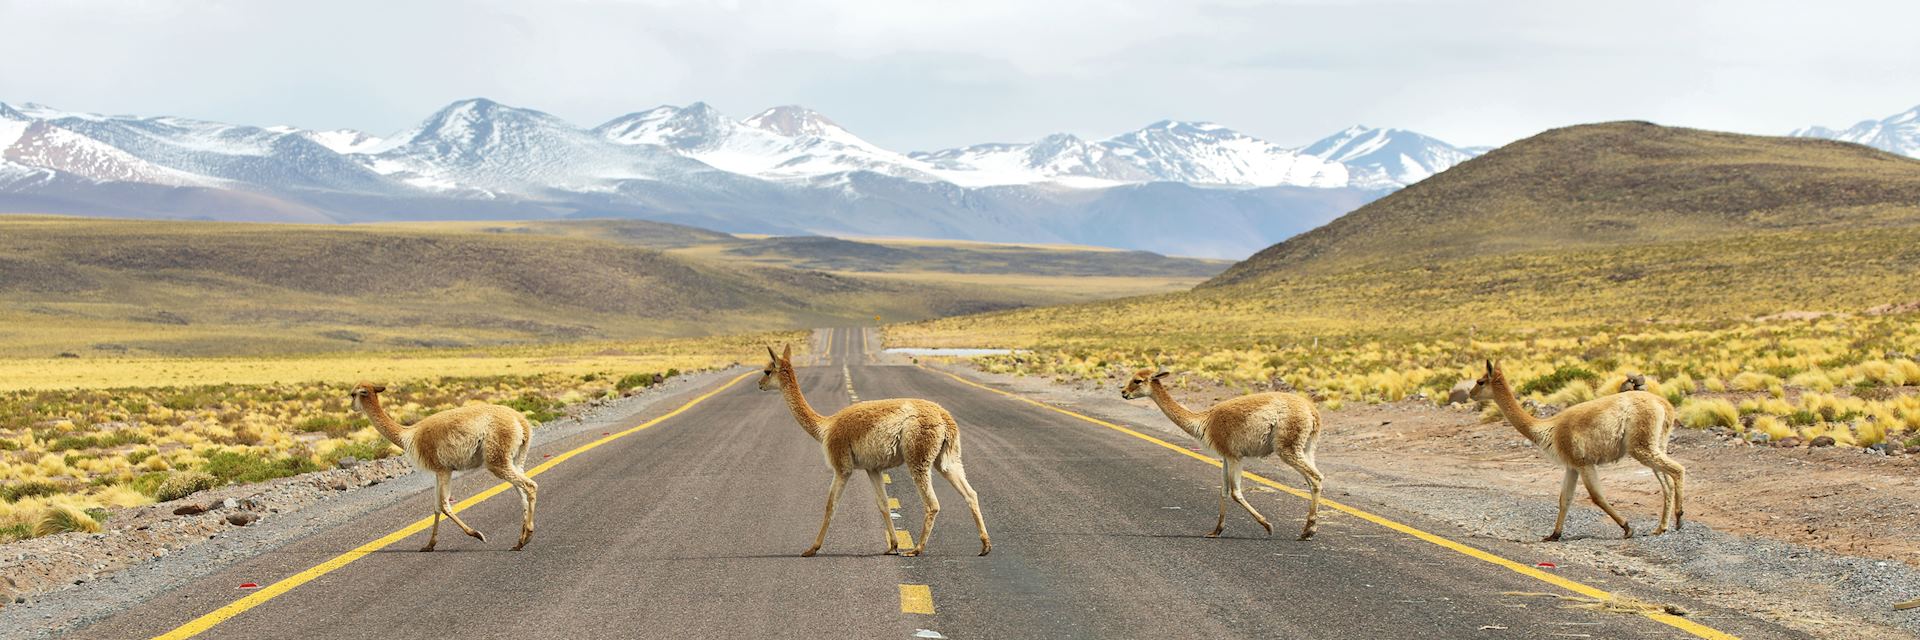 https://media.audleytravel.com/-/media/images/home/south-america/region-guides/self-driving-in-chile-and-argentina/istock_492607598_vicunas_in_the_meadows_of_atacama_region_3000x1000.jpg?q=79&w=1920&h=640